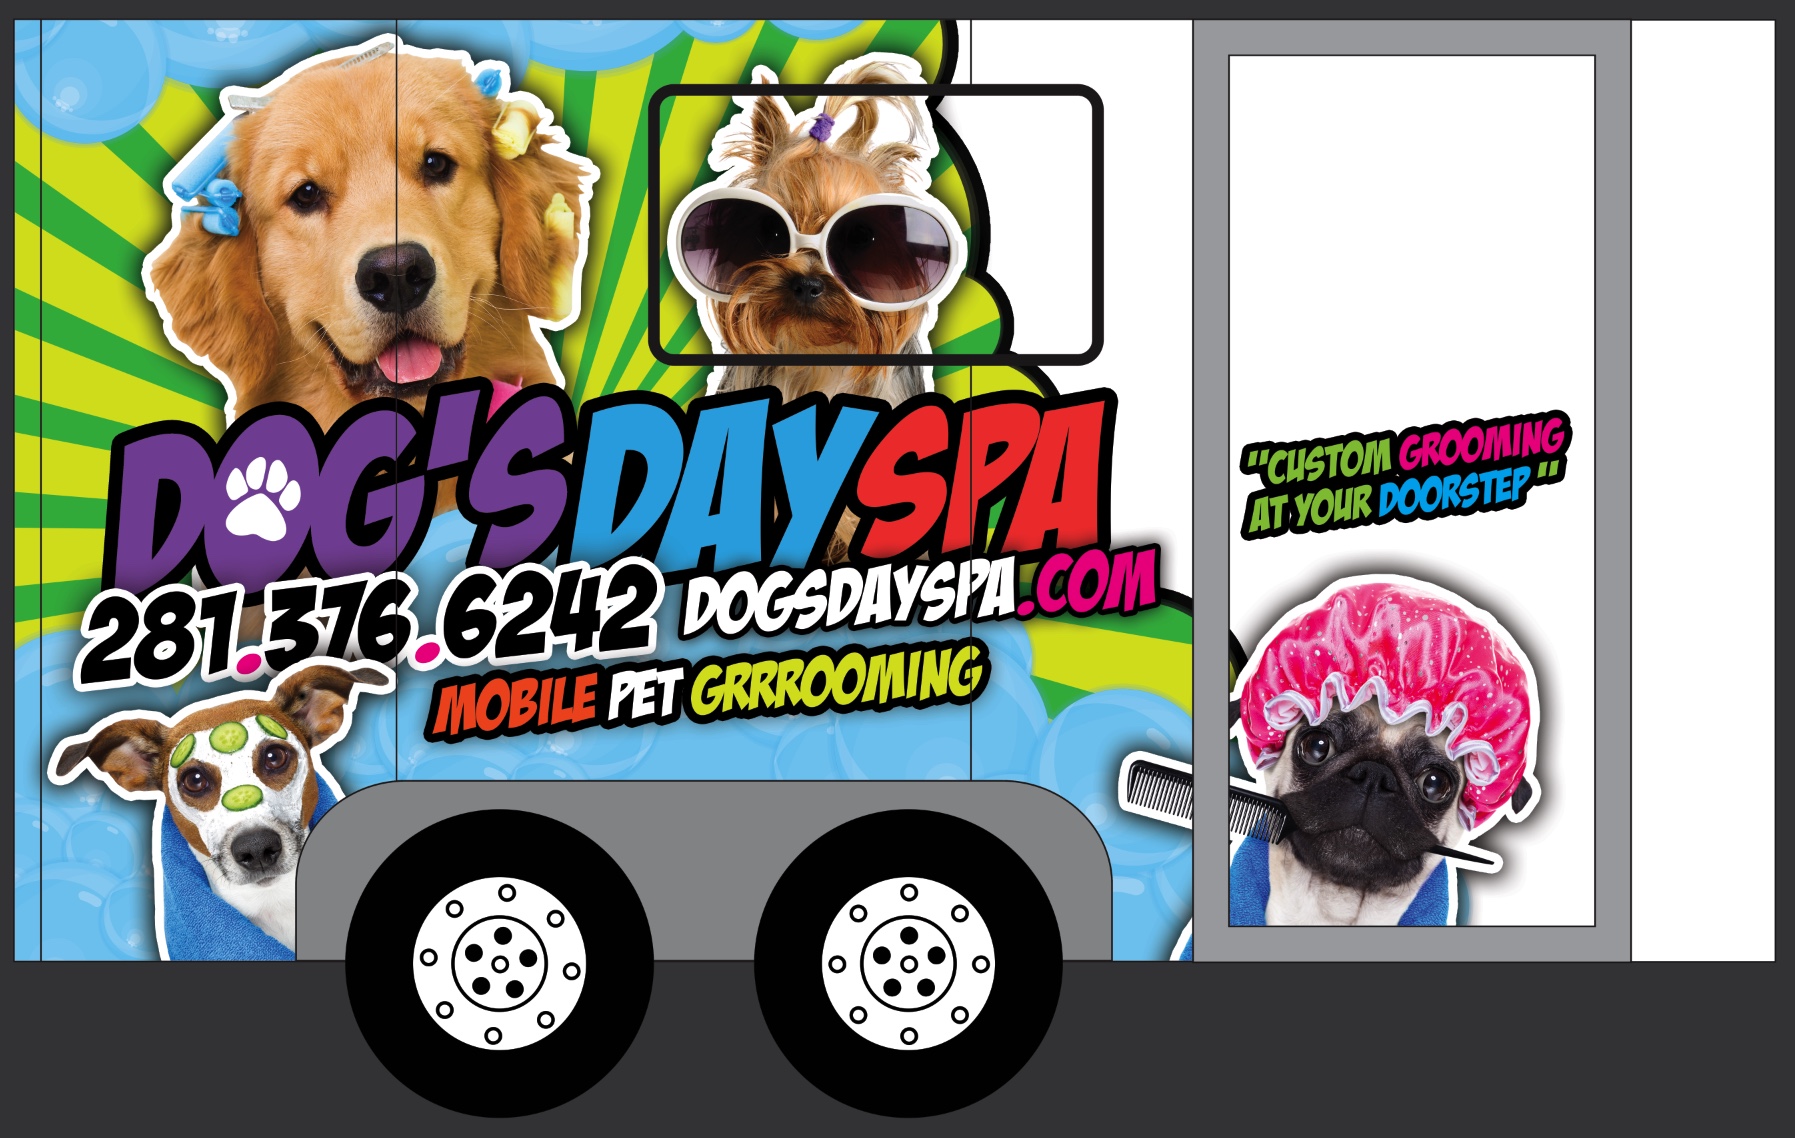 Great Dog Grooming Spring Tx in the world Learn more here 